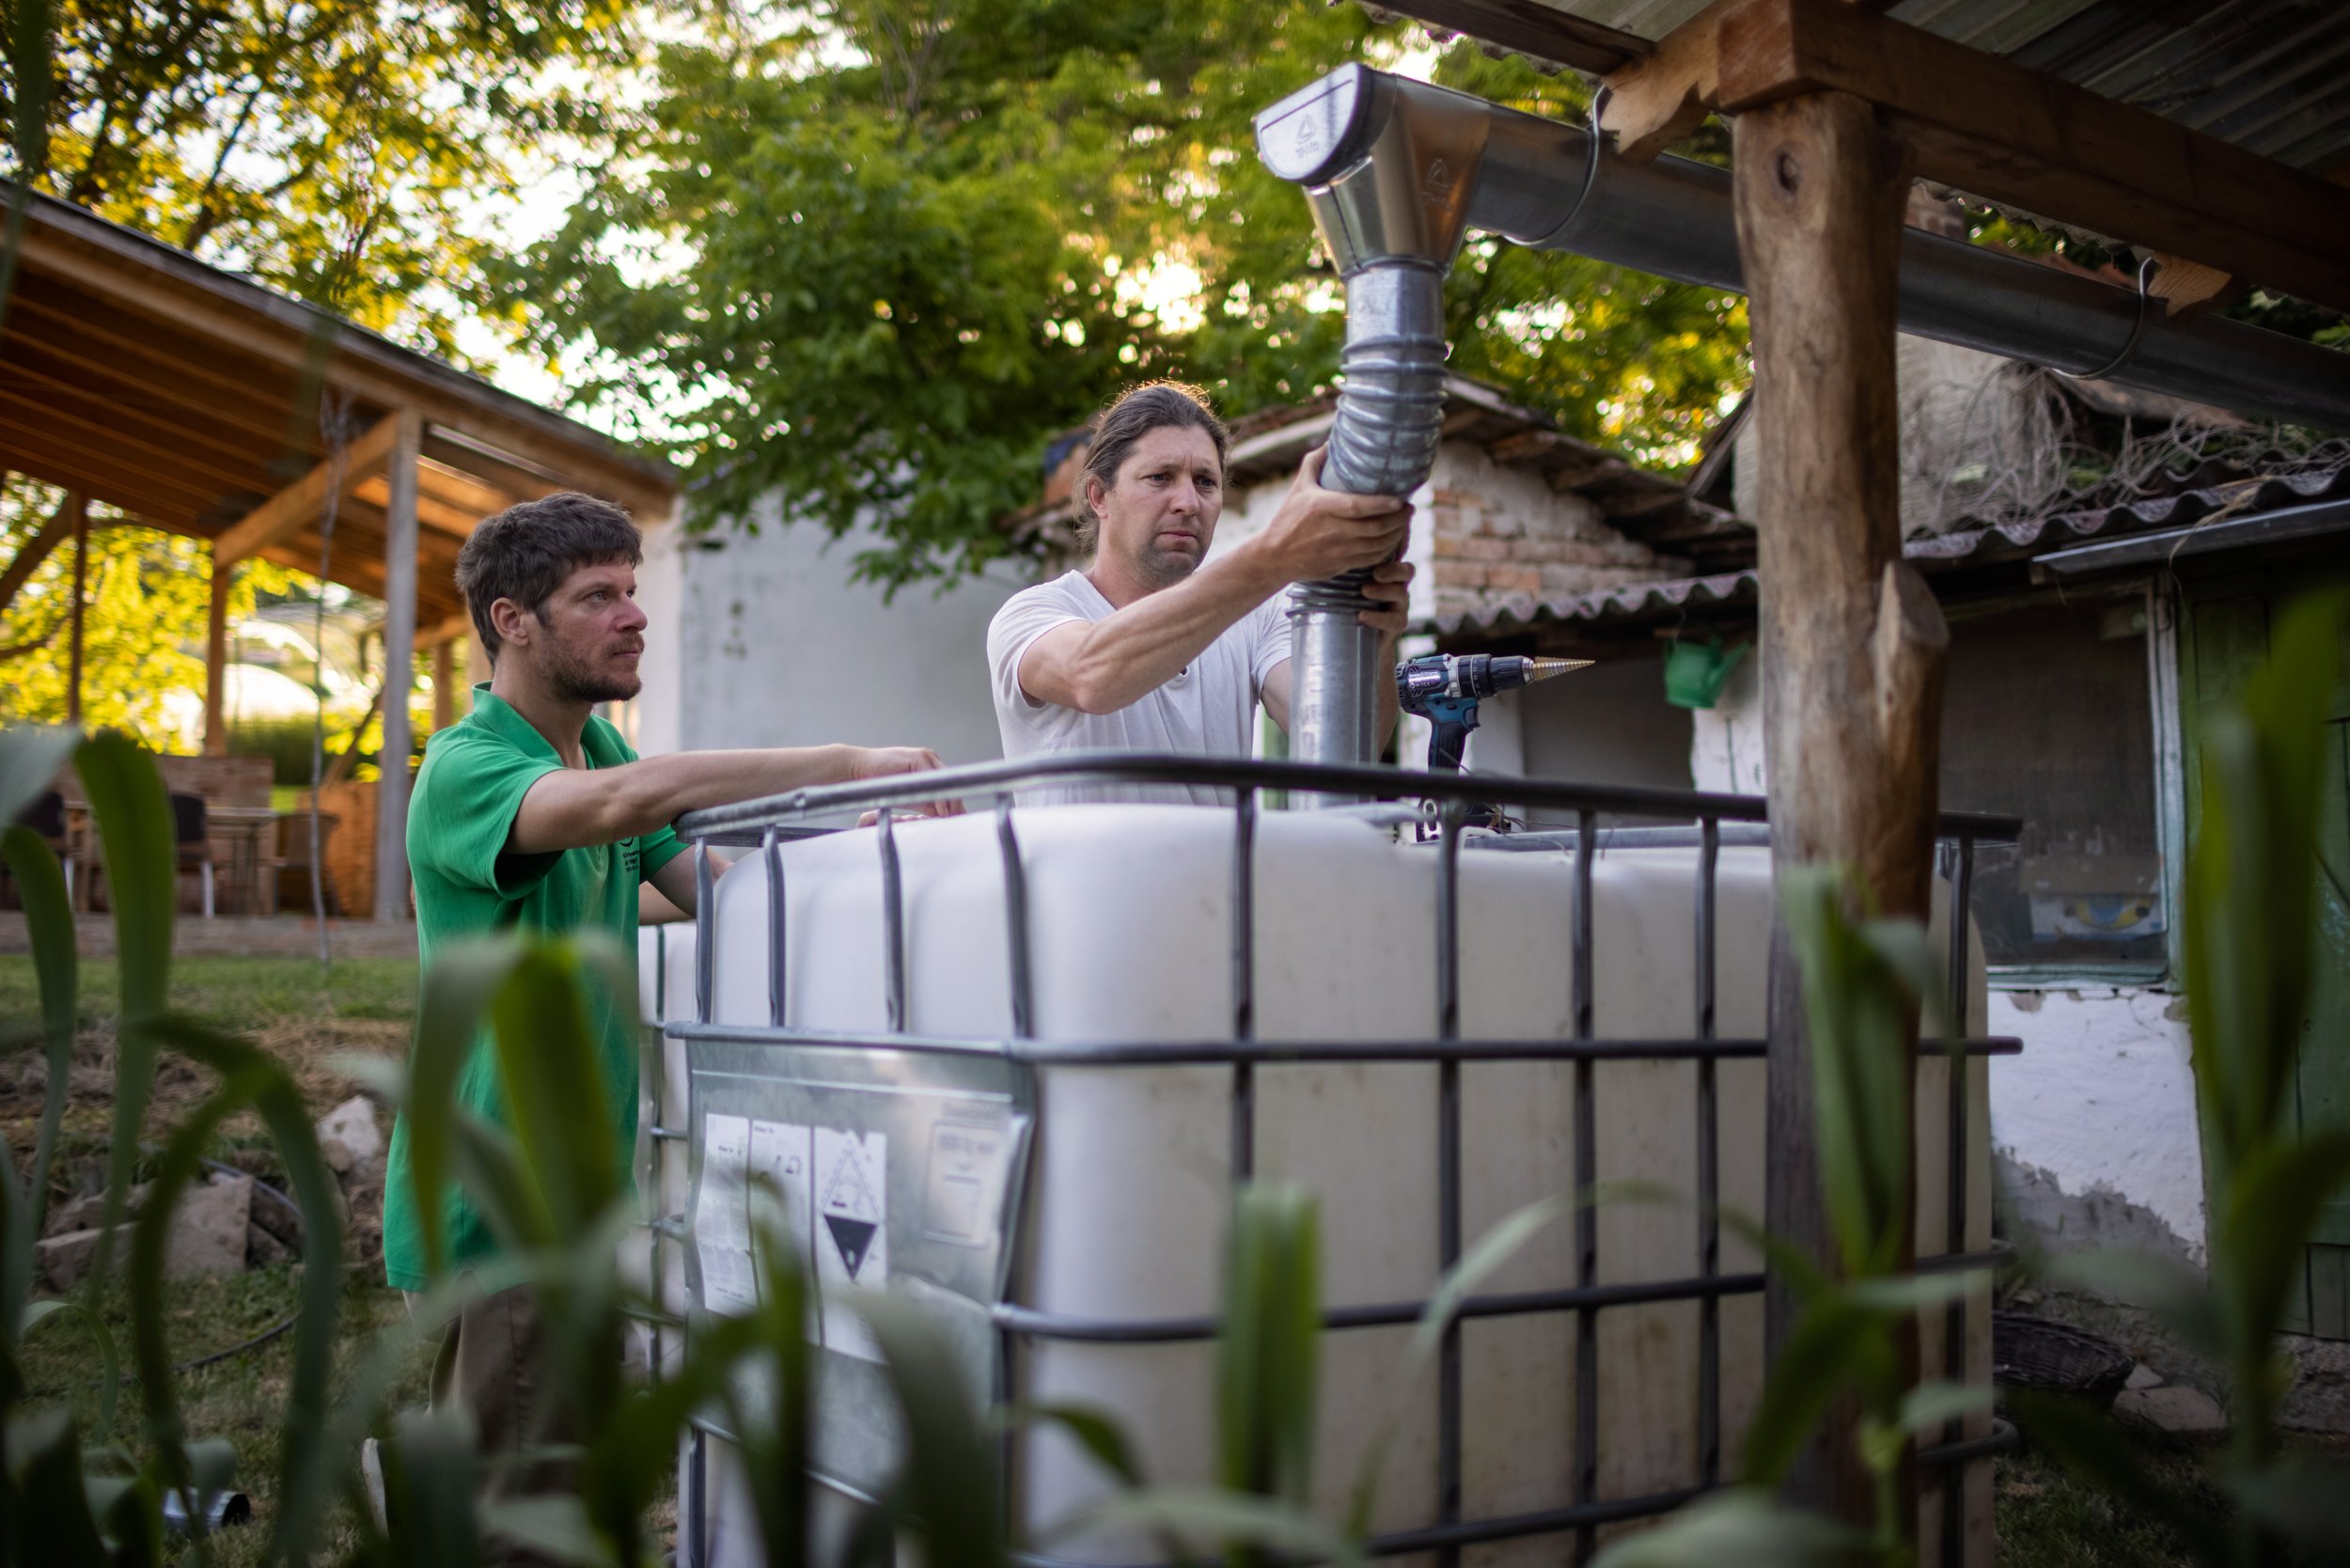  To catch and utilize rainwater, Gergő and Dani install water collection tanks at the community center in the village. Nyim, May 22, 2022. 